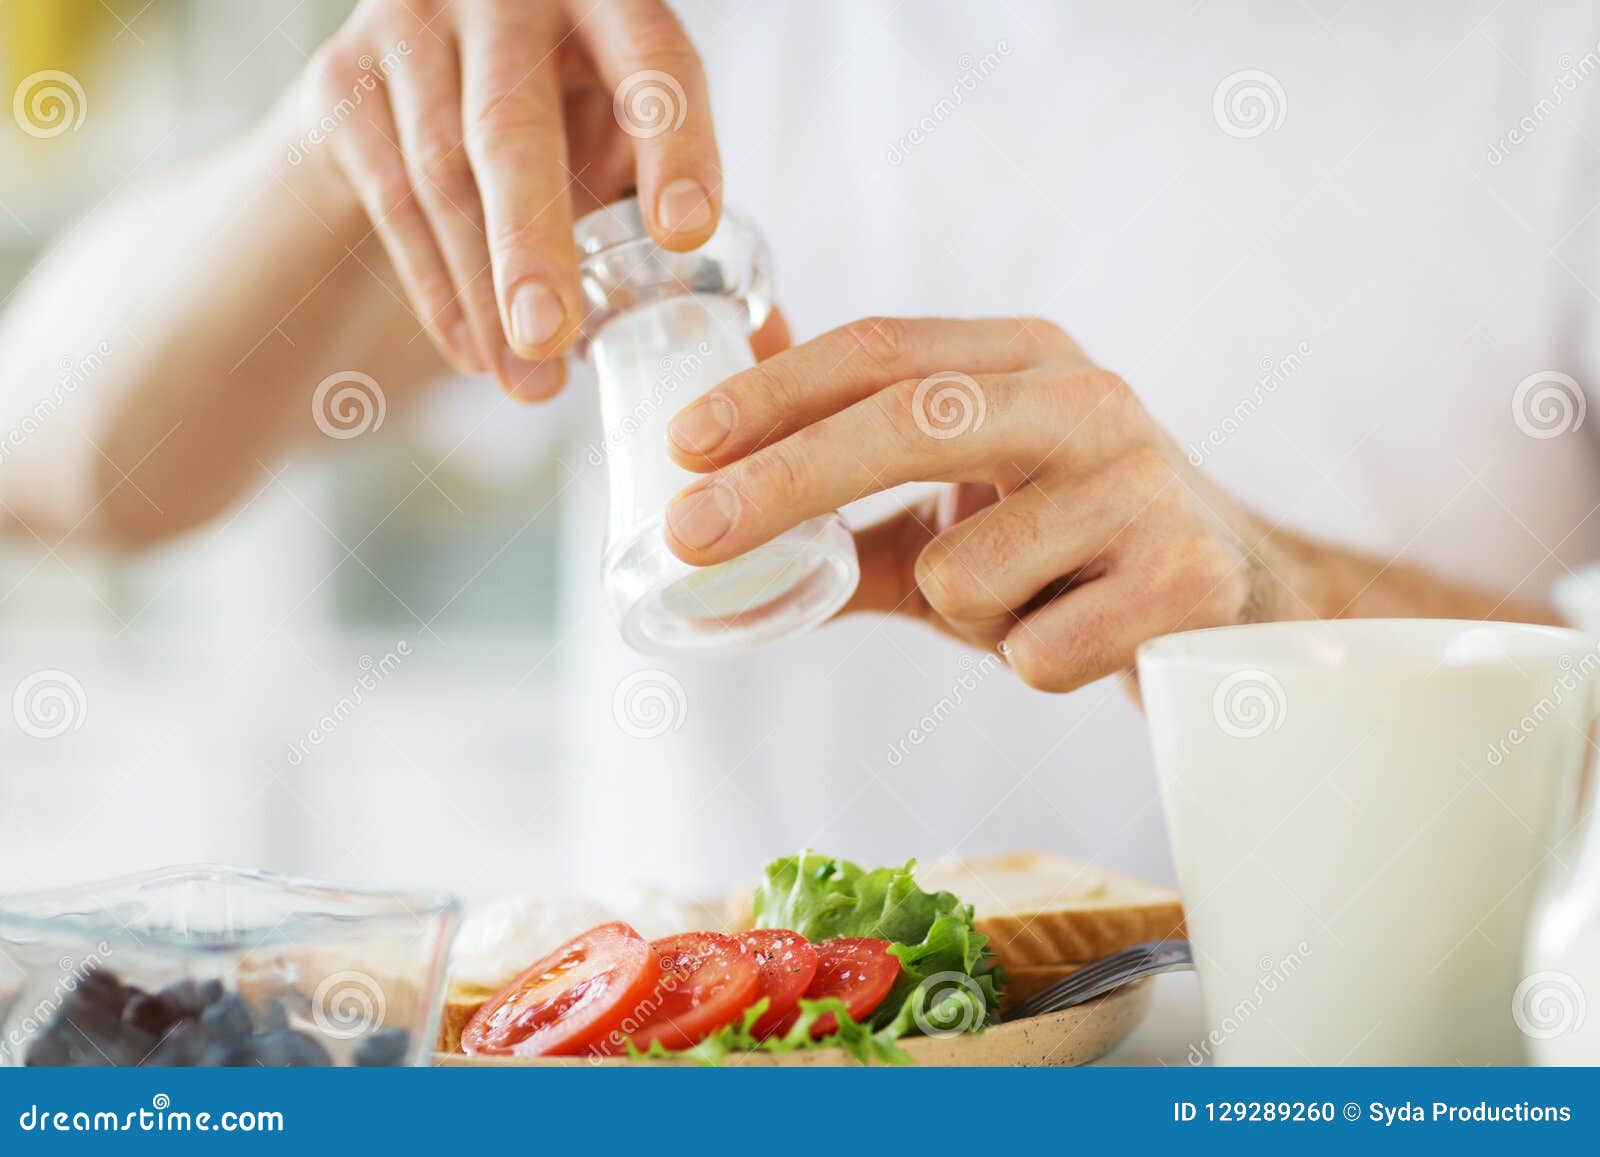 close up of male hands seasoning food by salt mill